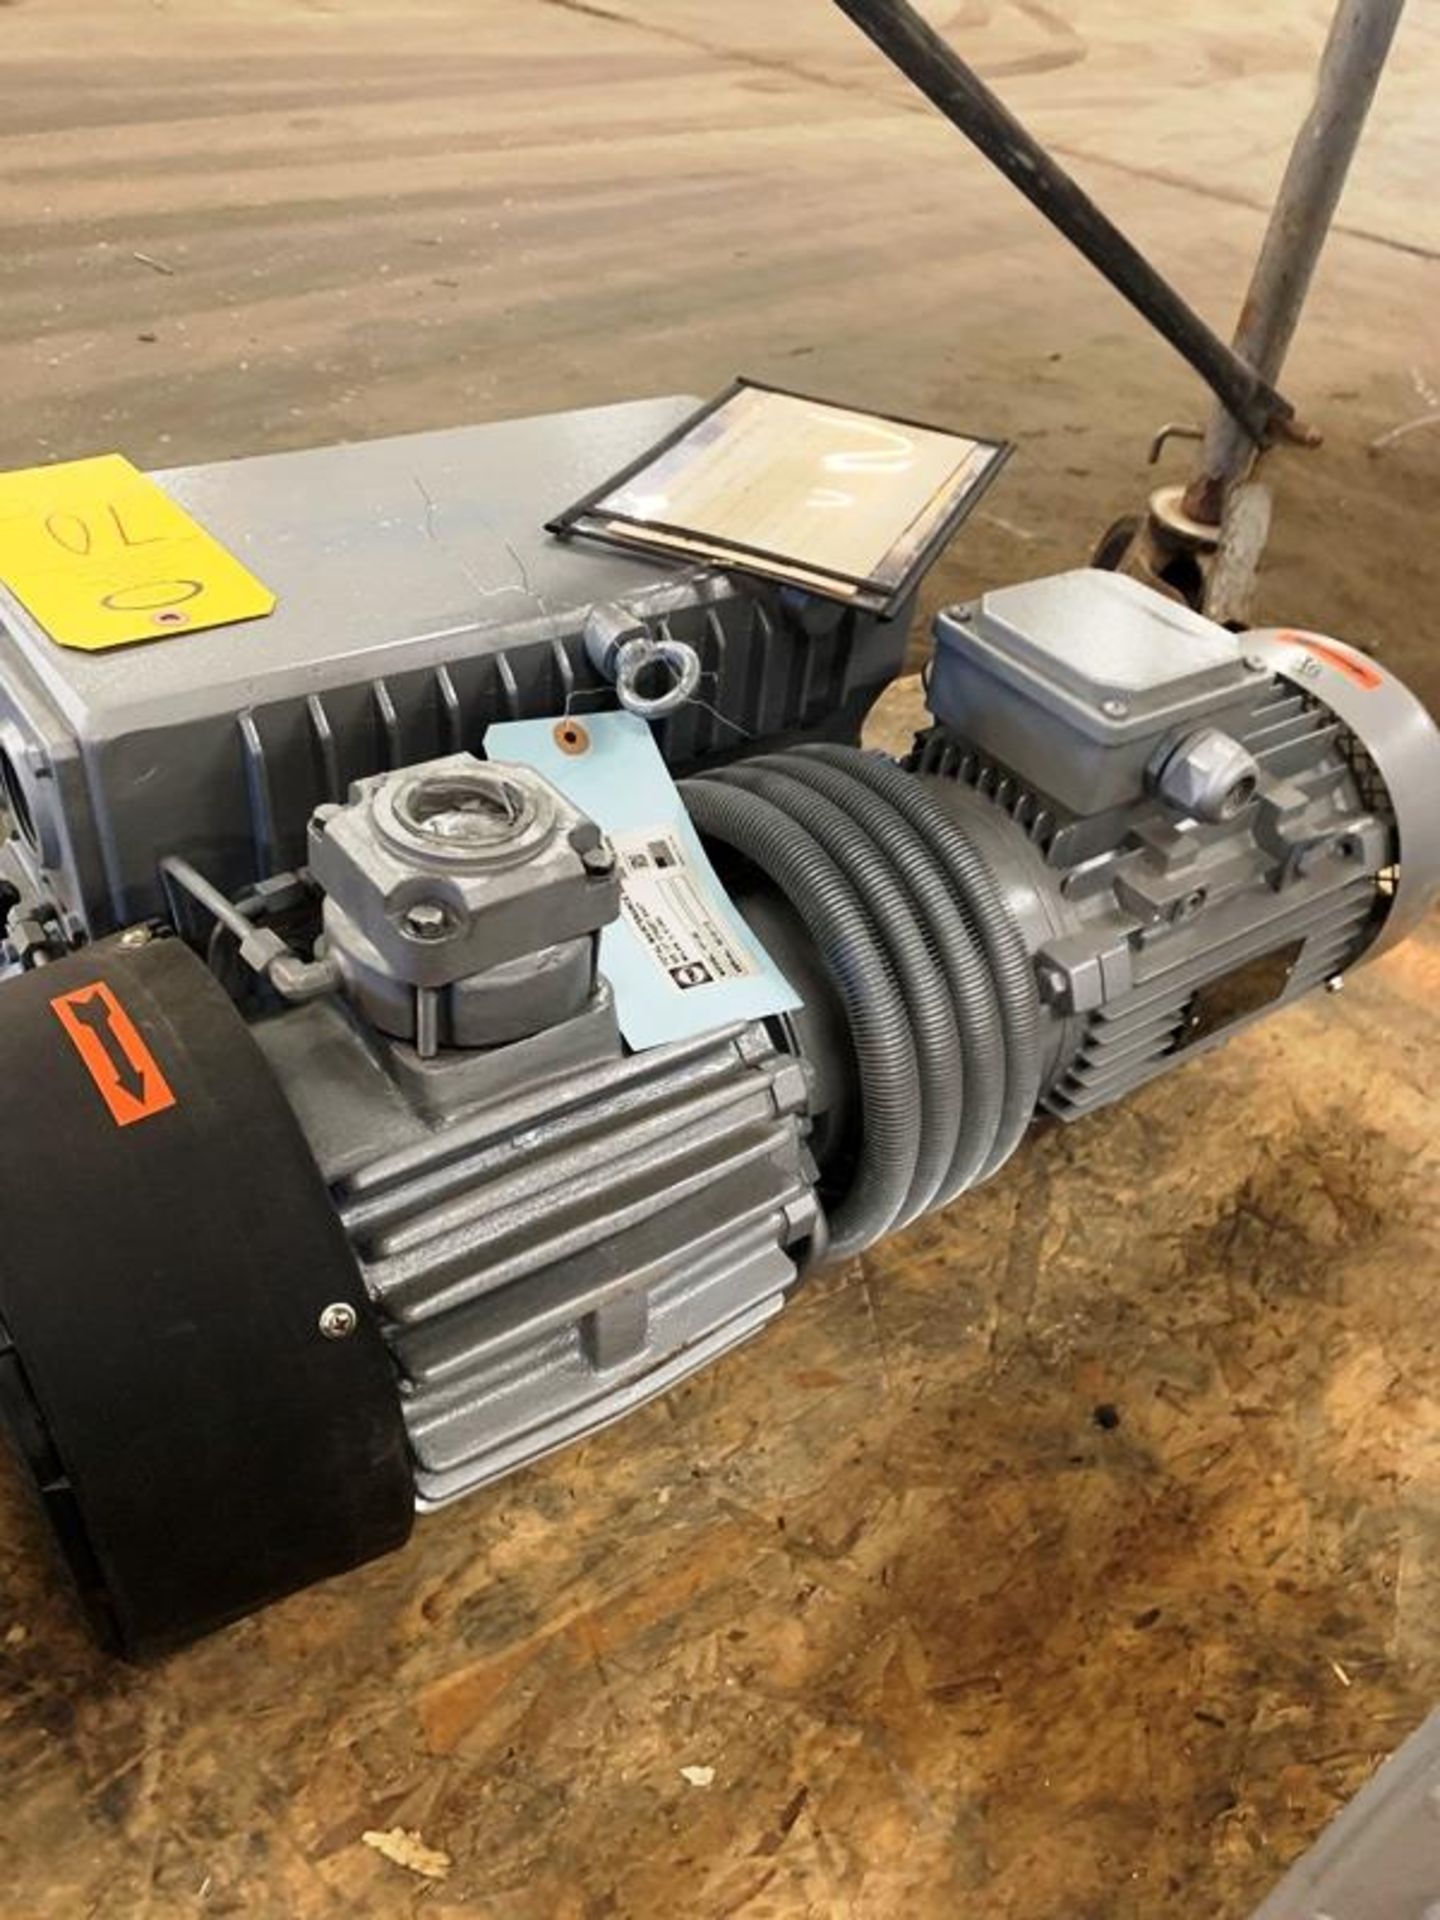 New SV Series Rotary Vane Vacuum Pump, Ser. #5610113, 3 phase, 230/460 volts, new air filter (1) - Image 3 of 4